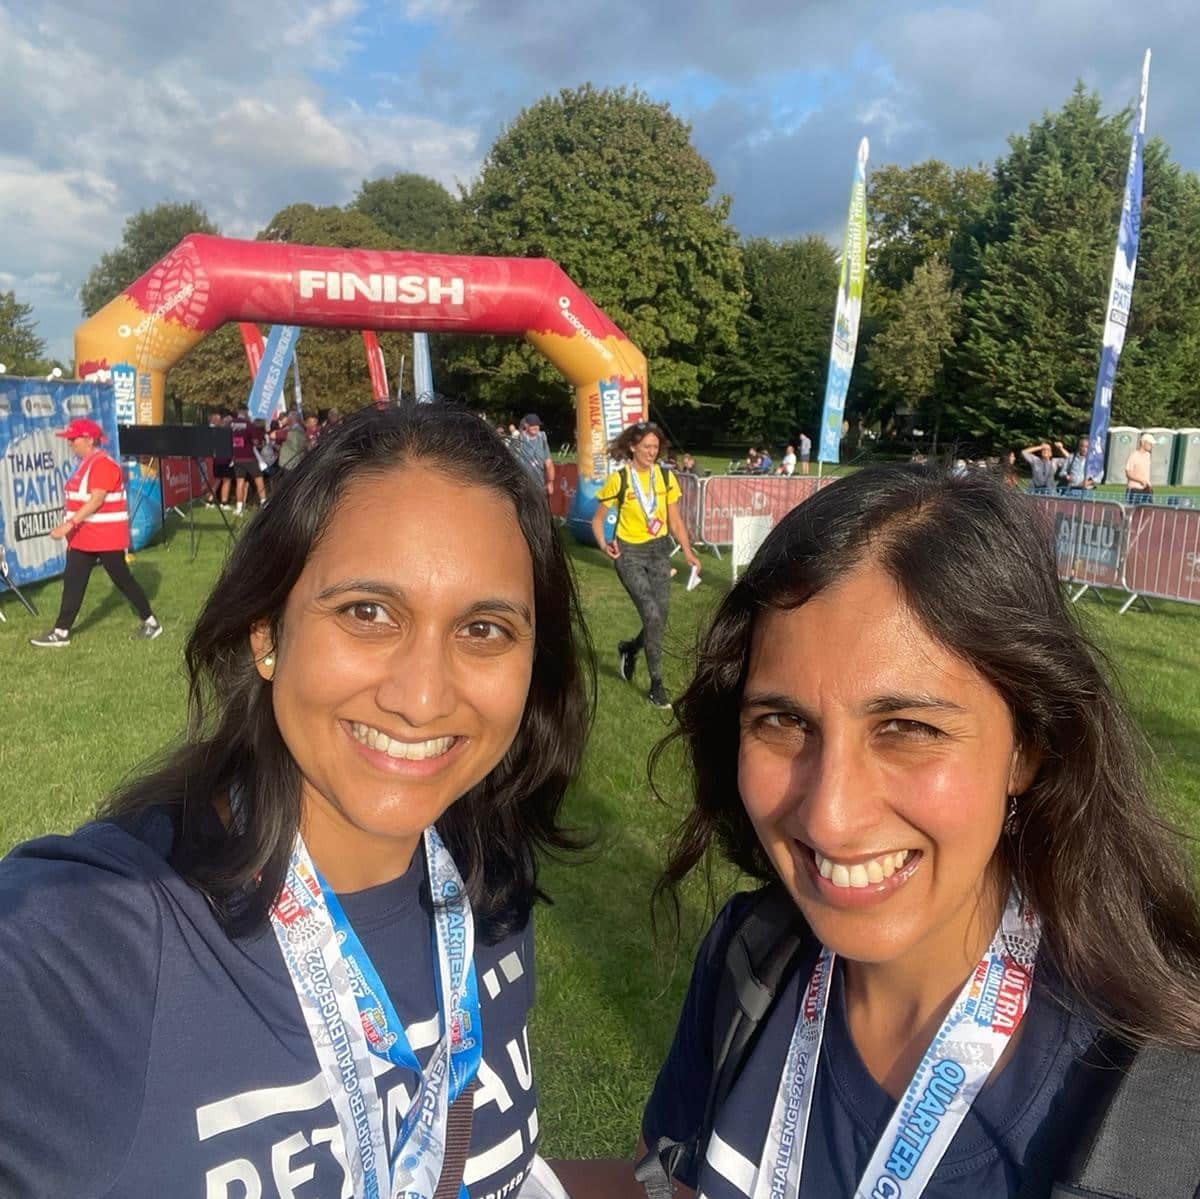 Image shows two women stood next to each other smiling. Both are wearing blue Retina UK t-shirts and their trek medals. An inflatable finish line is visible in the background.